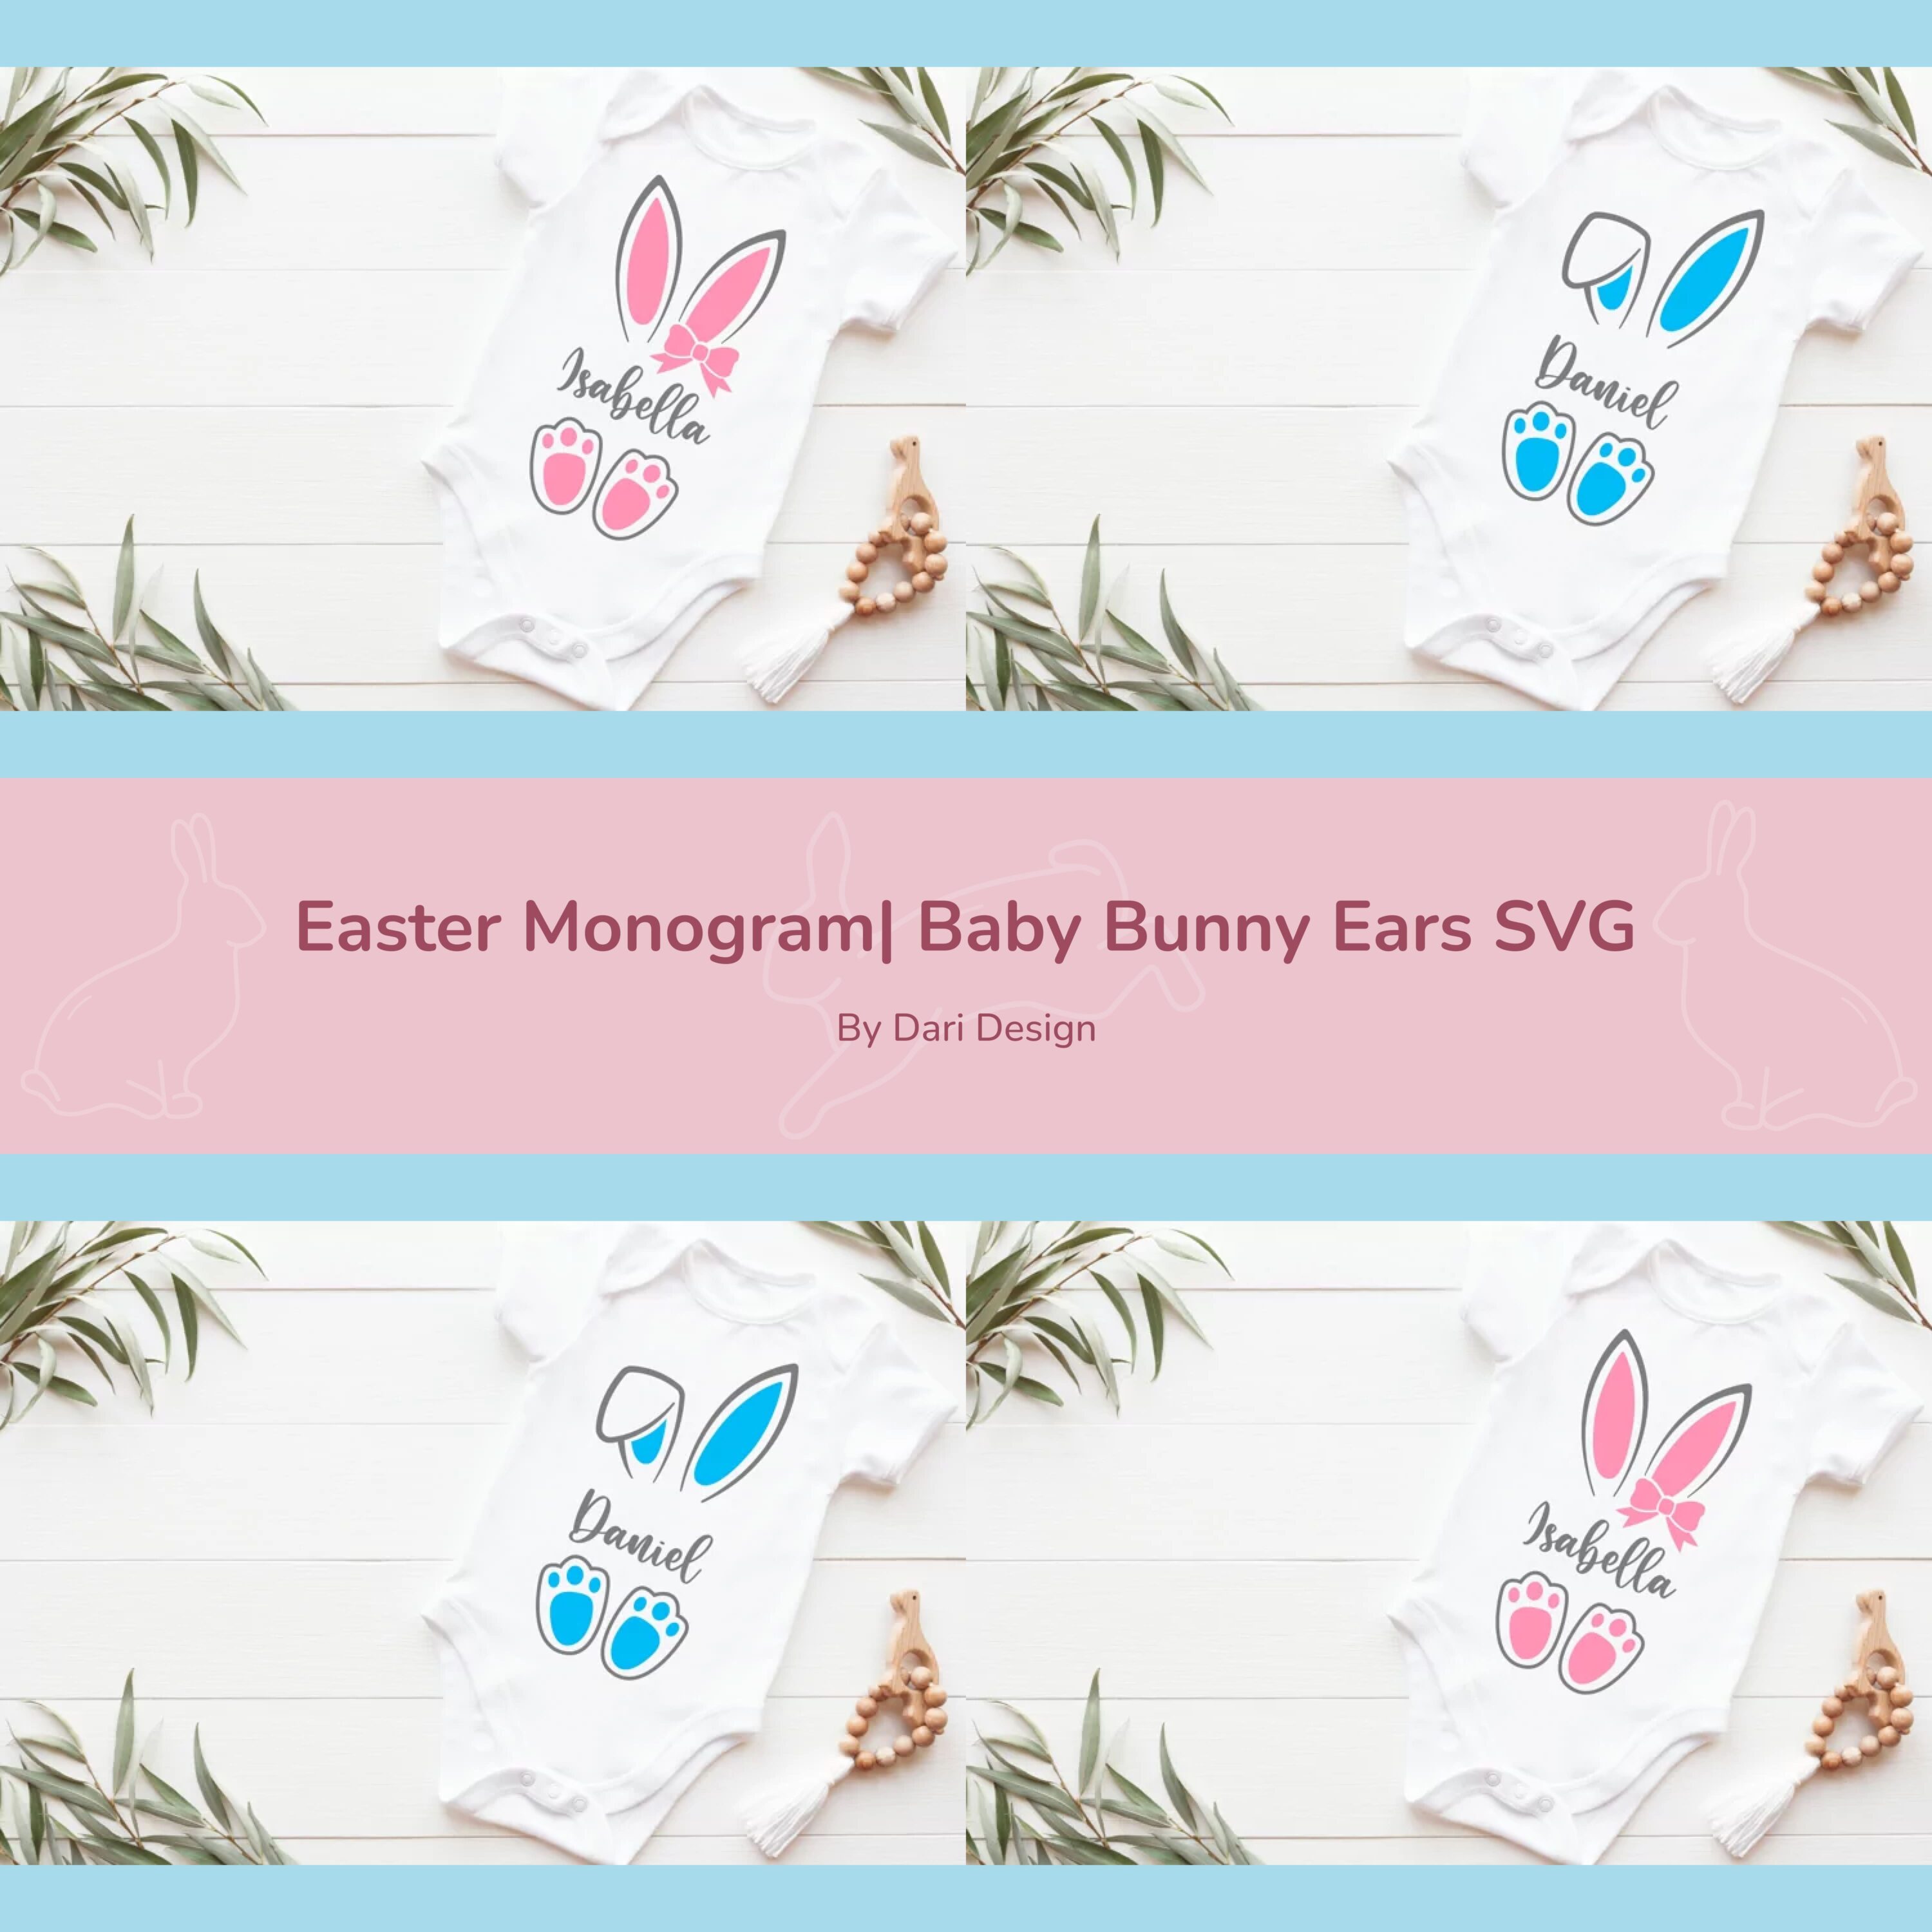 Easter Monogram| Baby Bunny Ears SVG cover.